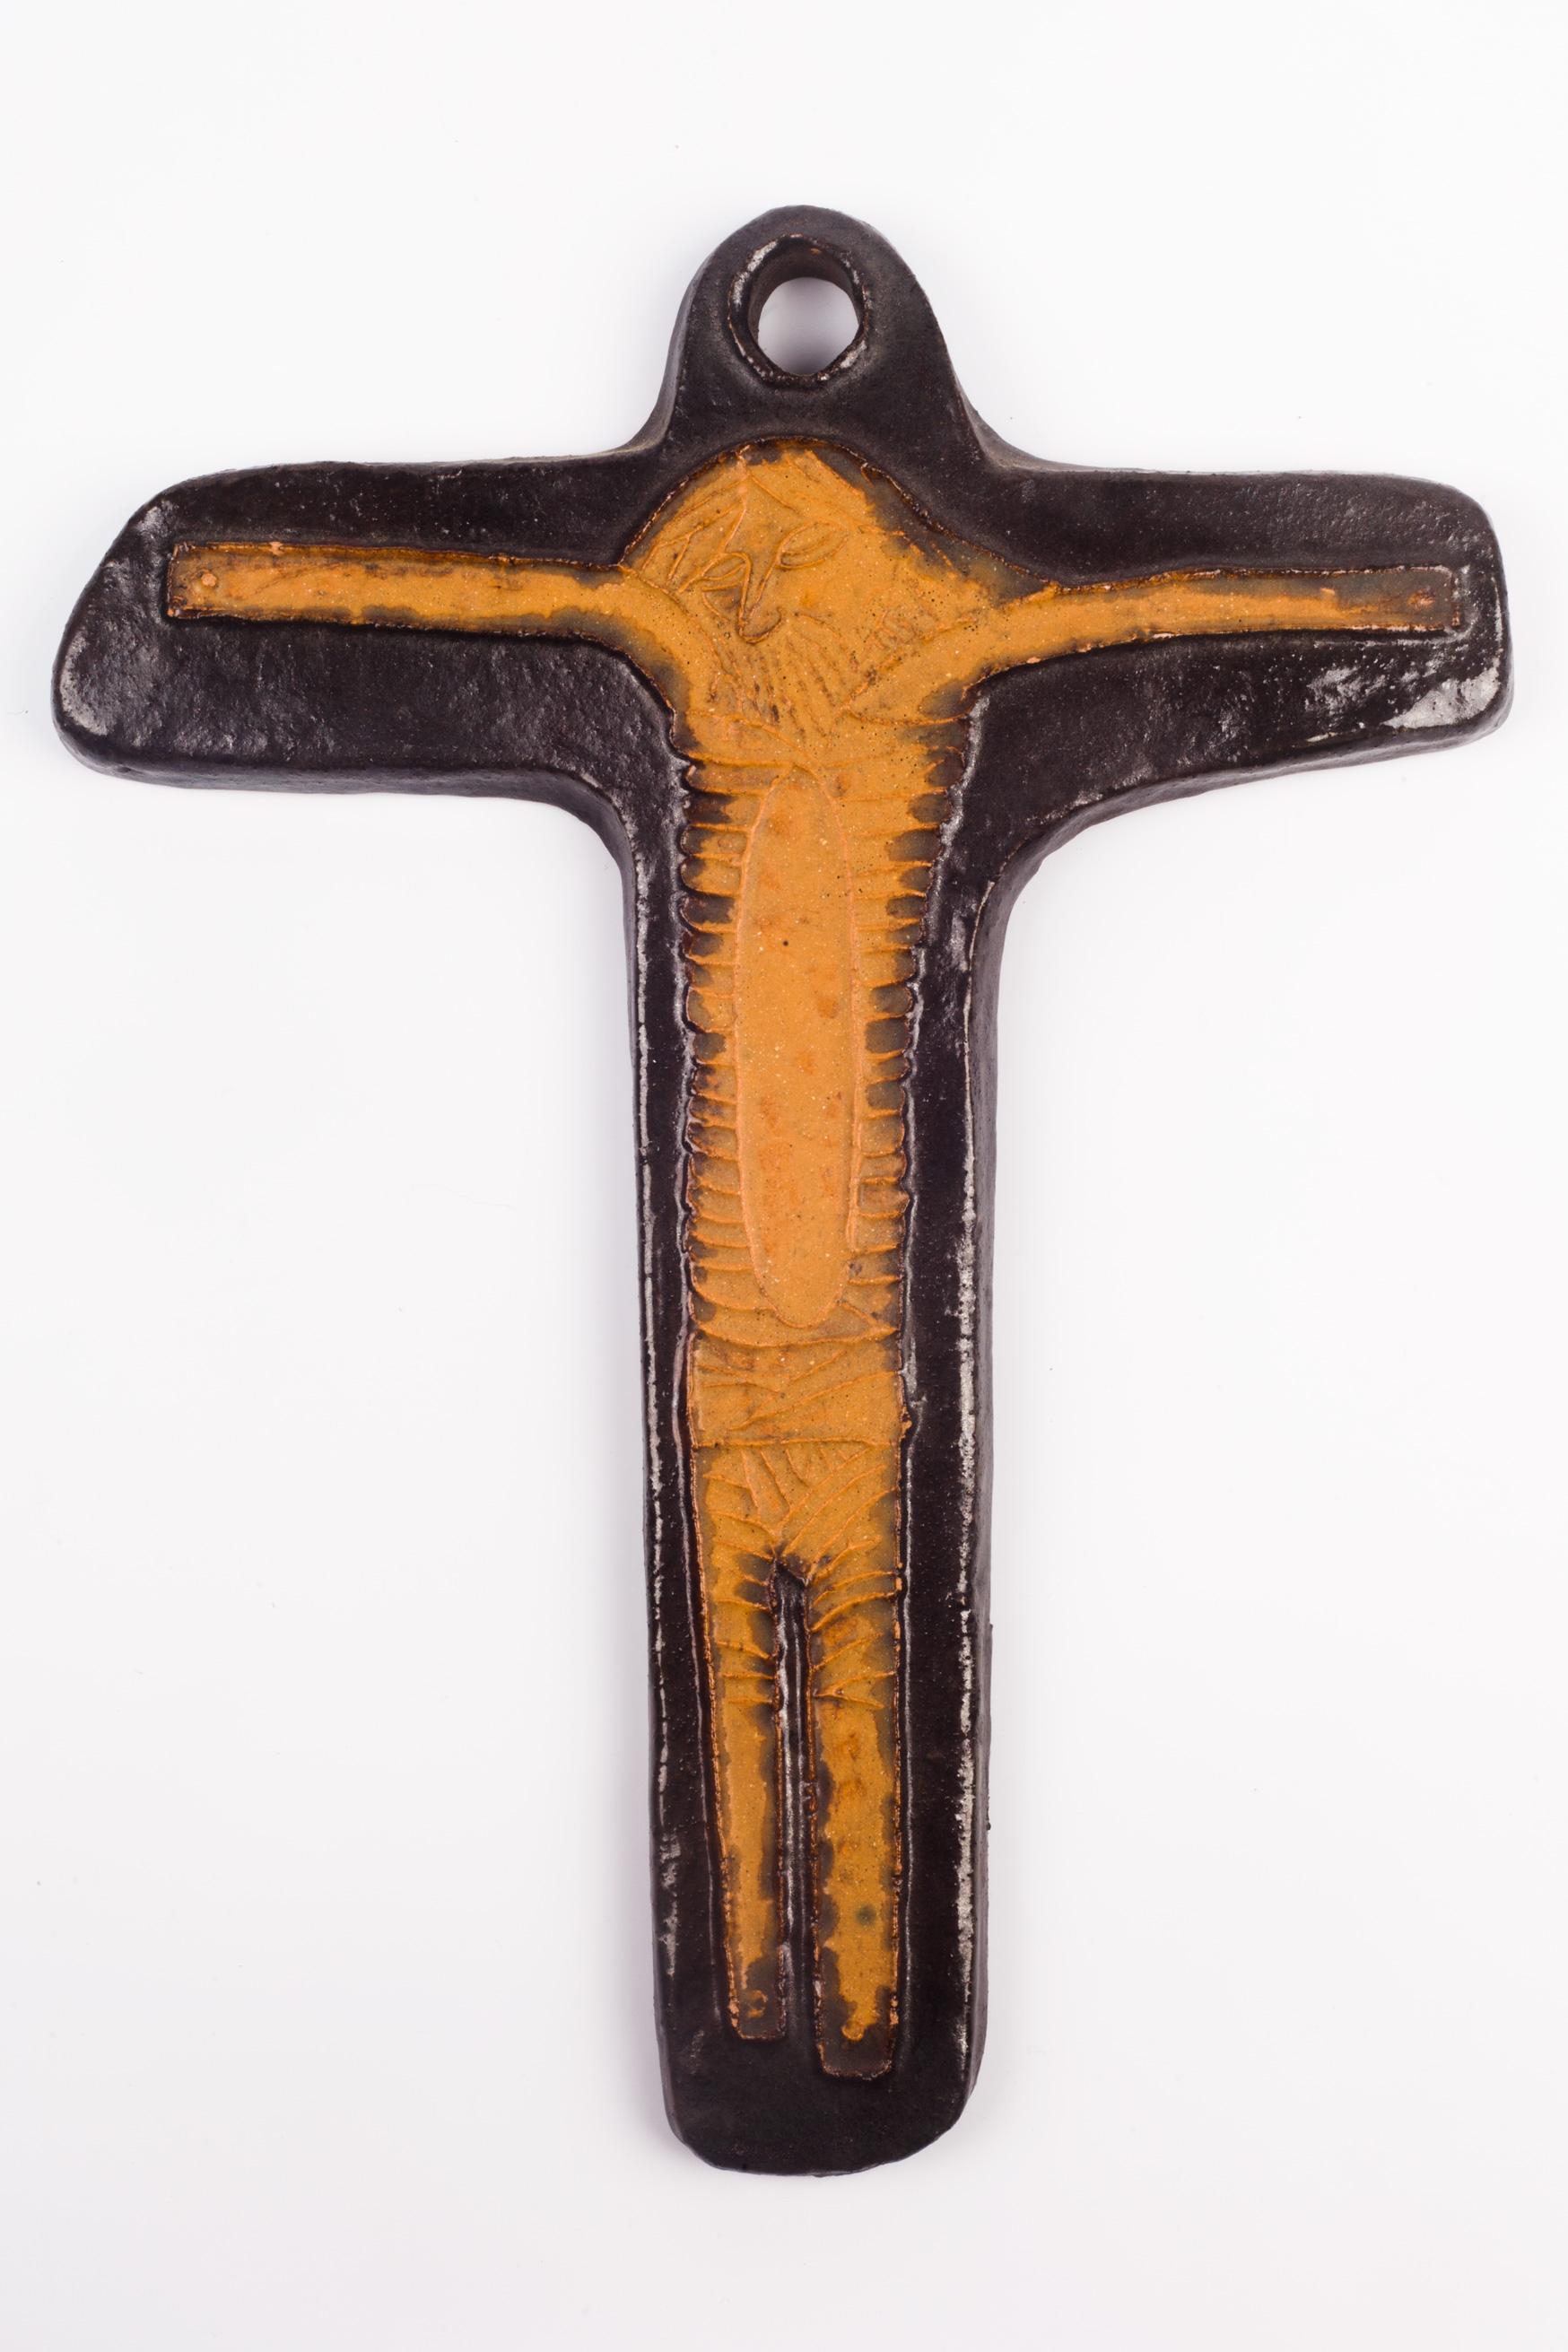 Early 1980s European crucifix hand-painted in matte and glossy earth colors. Brutalist, naive, and even outsider Christ figure embossed on a dark brown cross. A one-of-a-kind, handcrafted piece that is part of a large collection of crosses made by